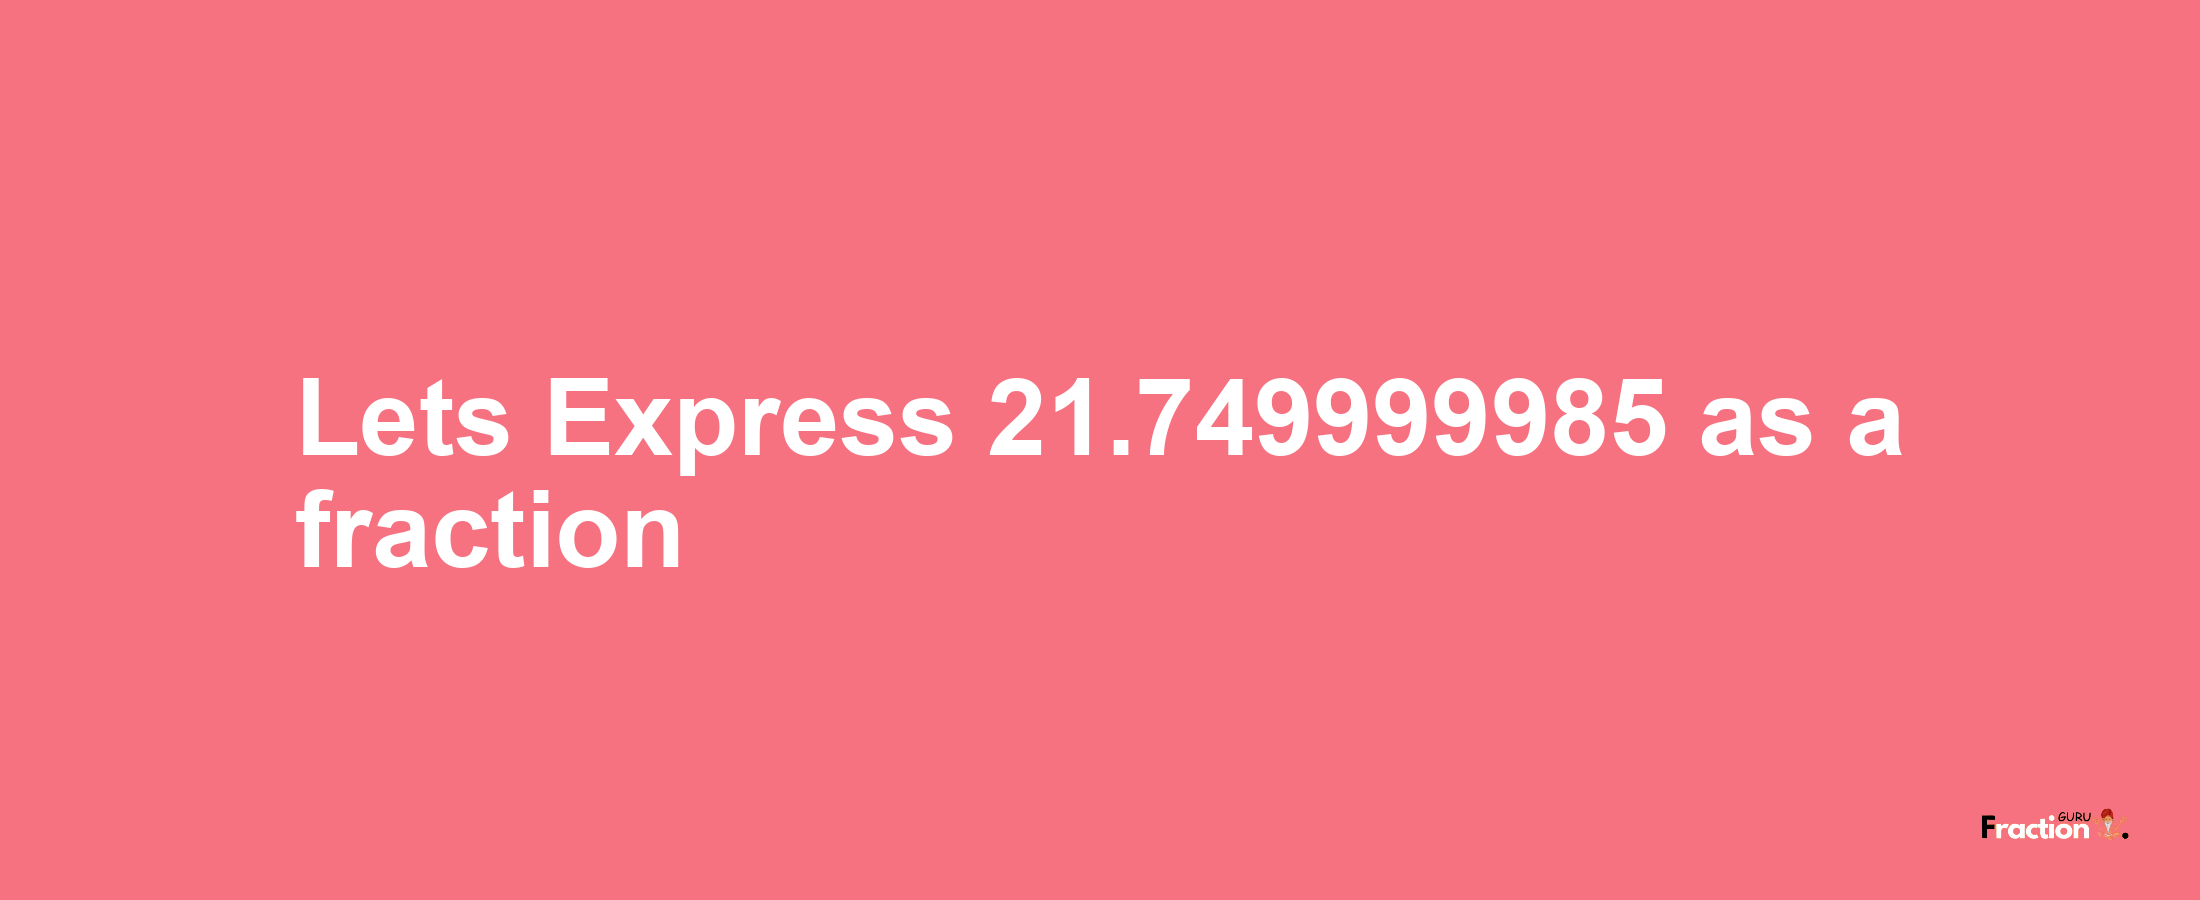 Lets Express 21.749999985 as afraction